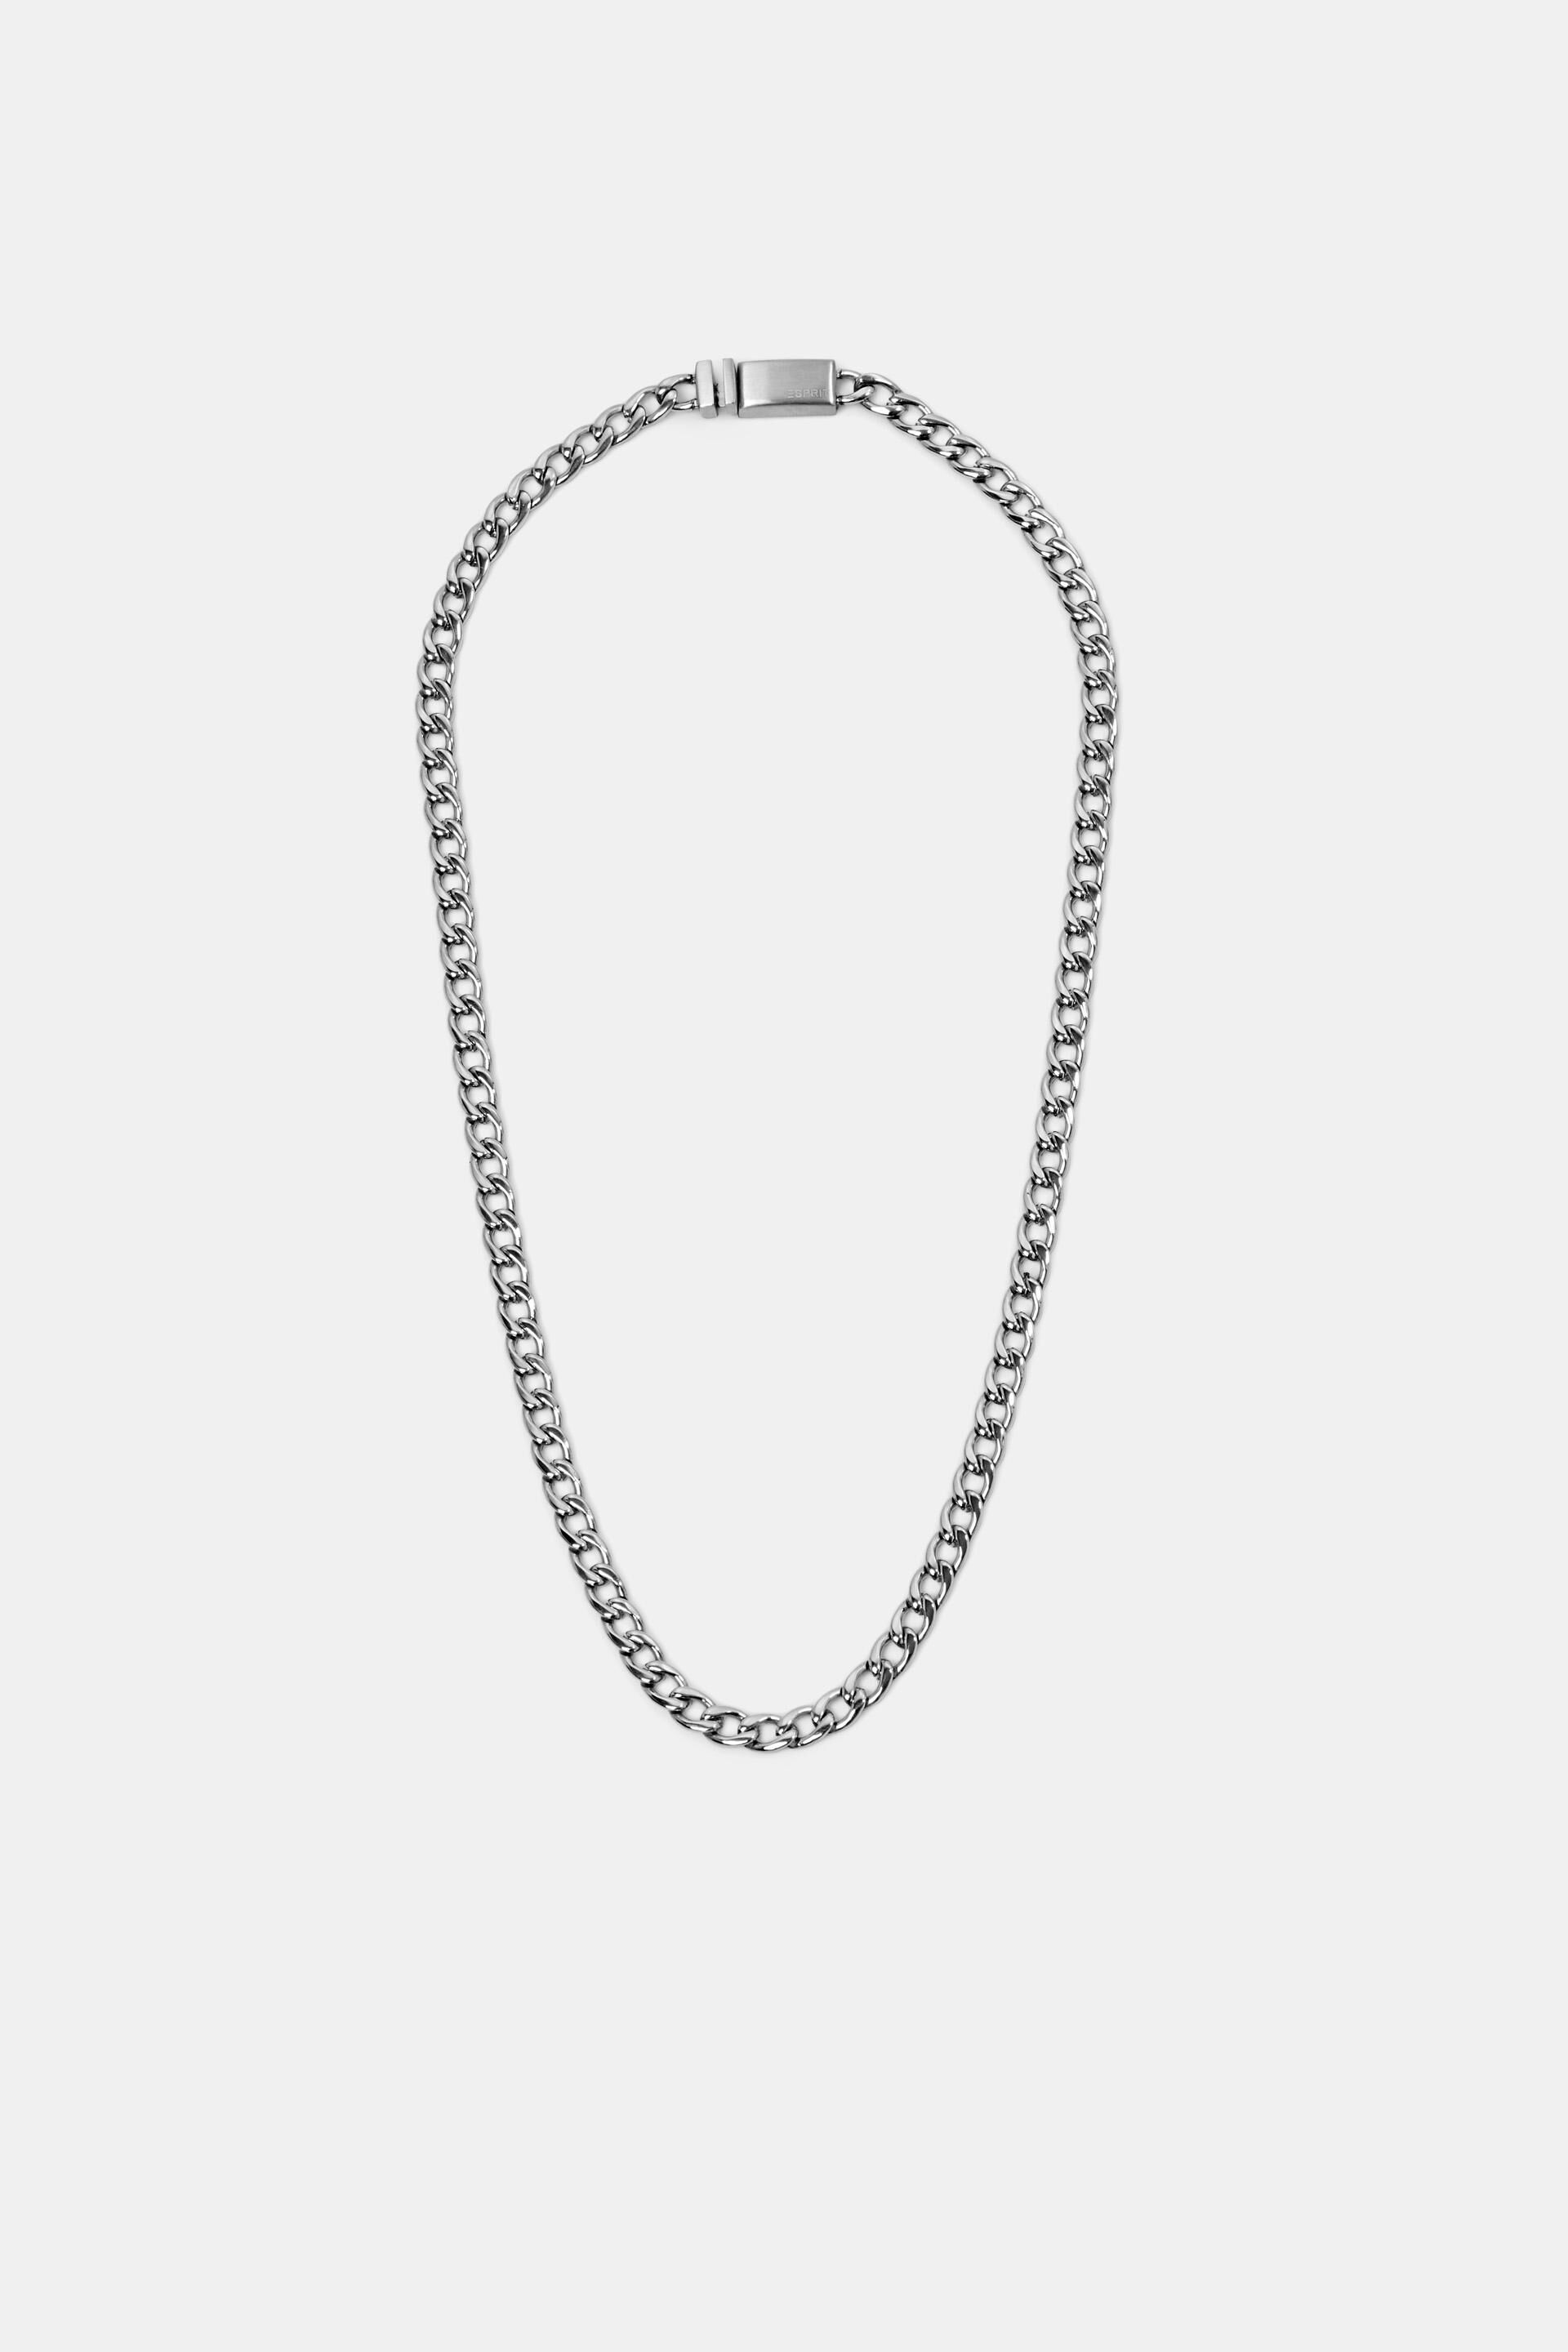 Esprit chunky Chain piece mid with necklace